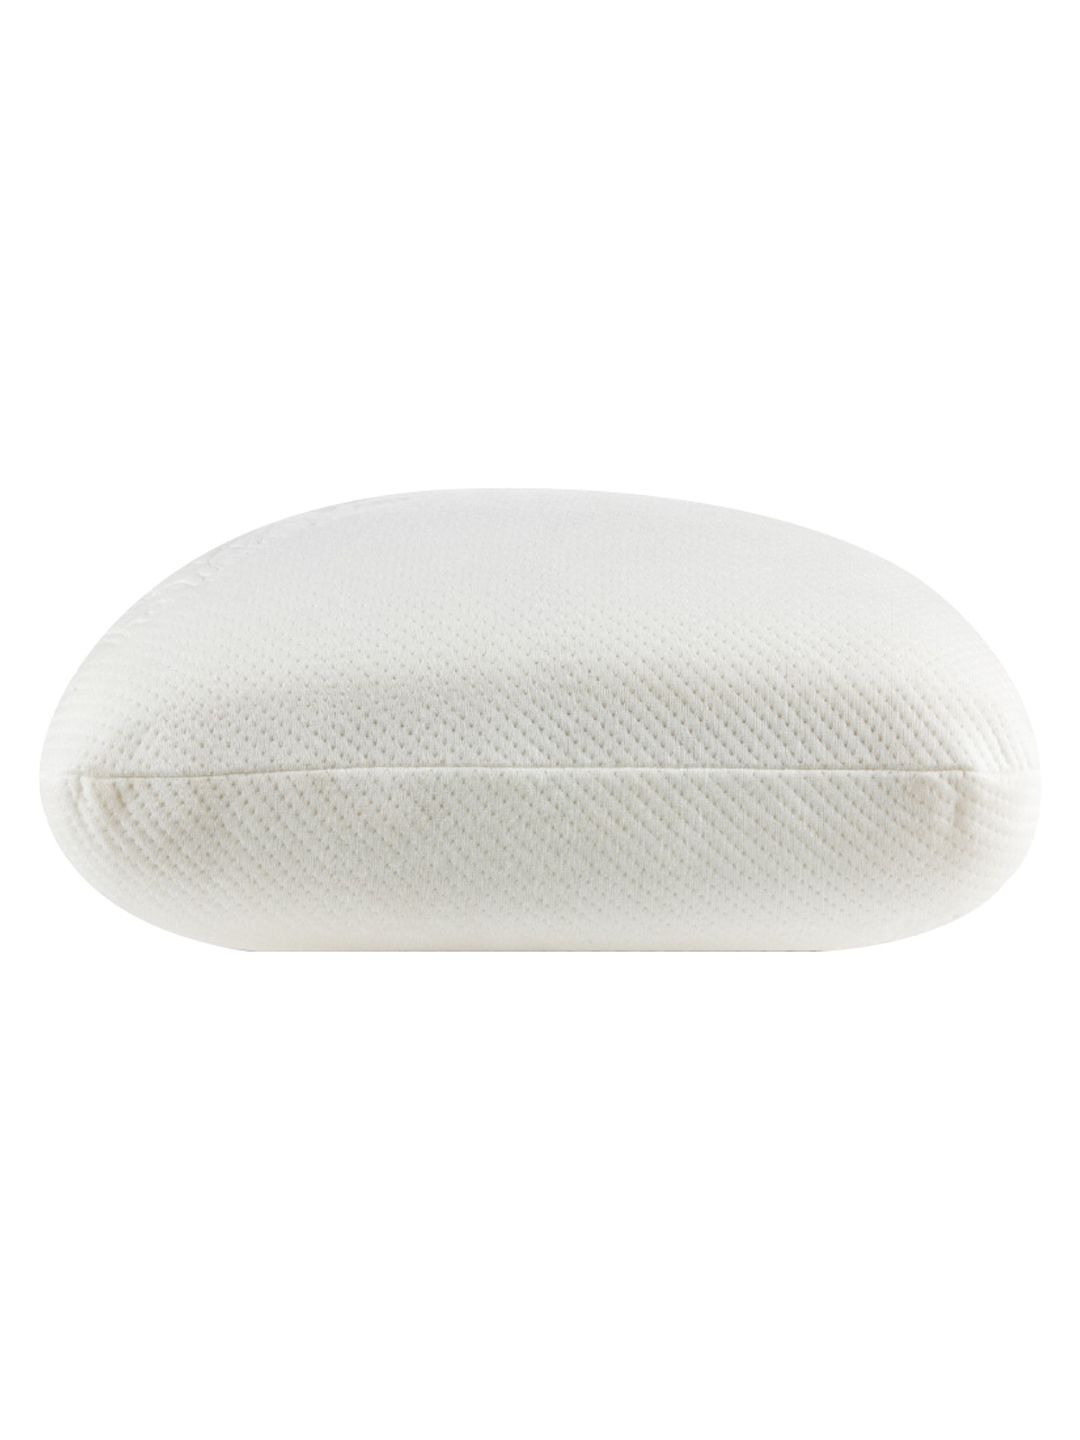 The White Willow White Solid 3-Layer Memory Foam Pillow Price in India